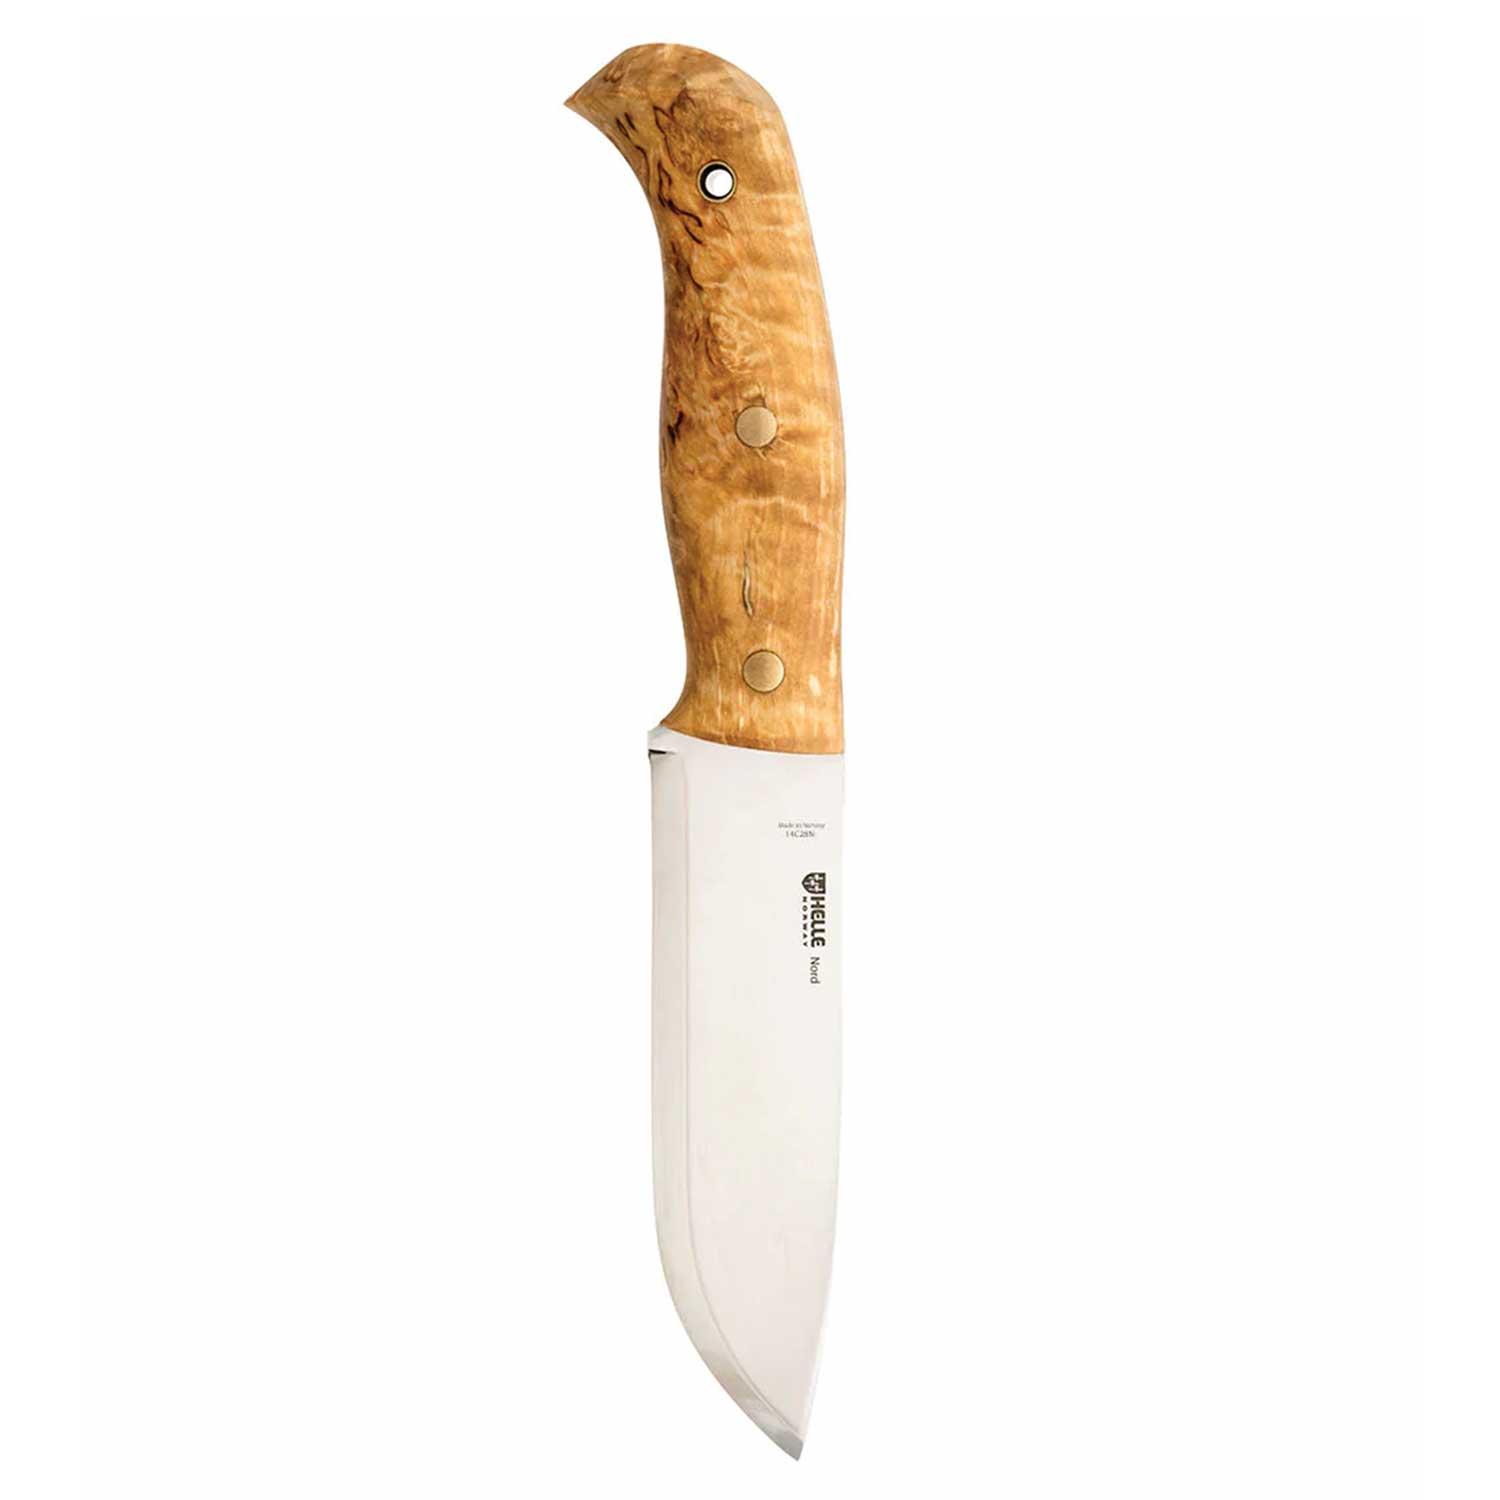 Nord Knife By Helle  Boundary Waters Catalog